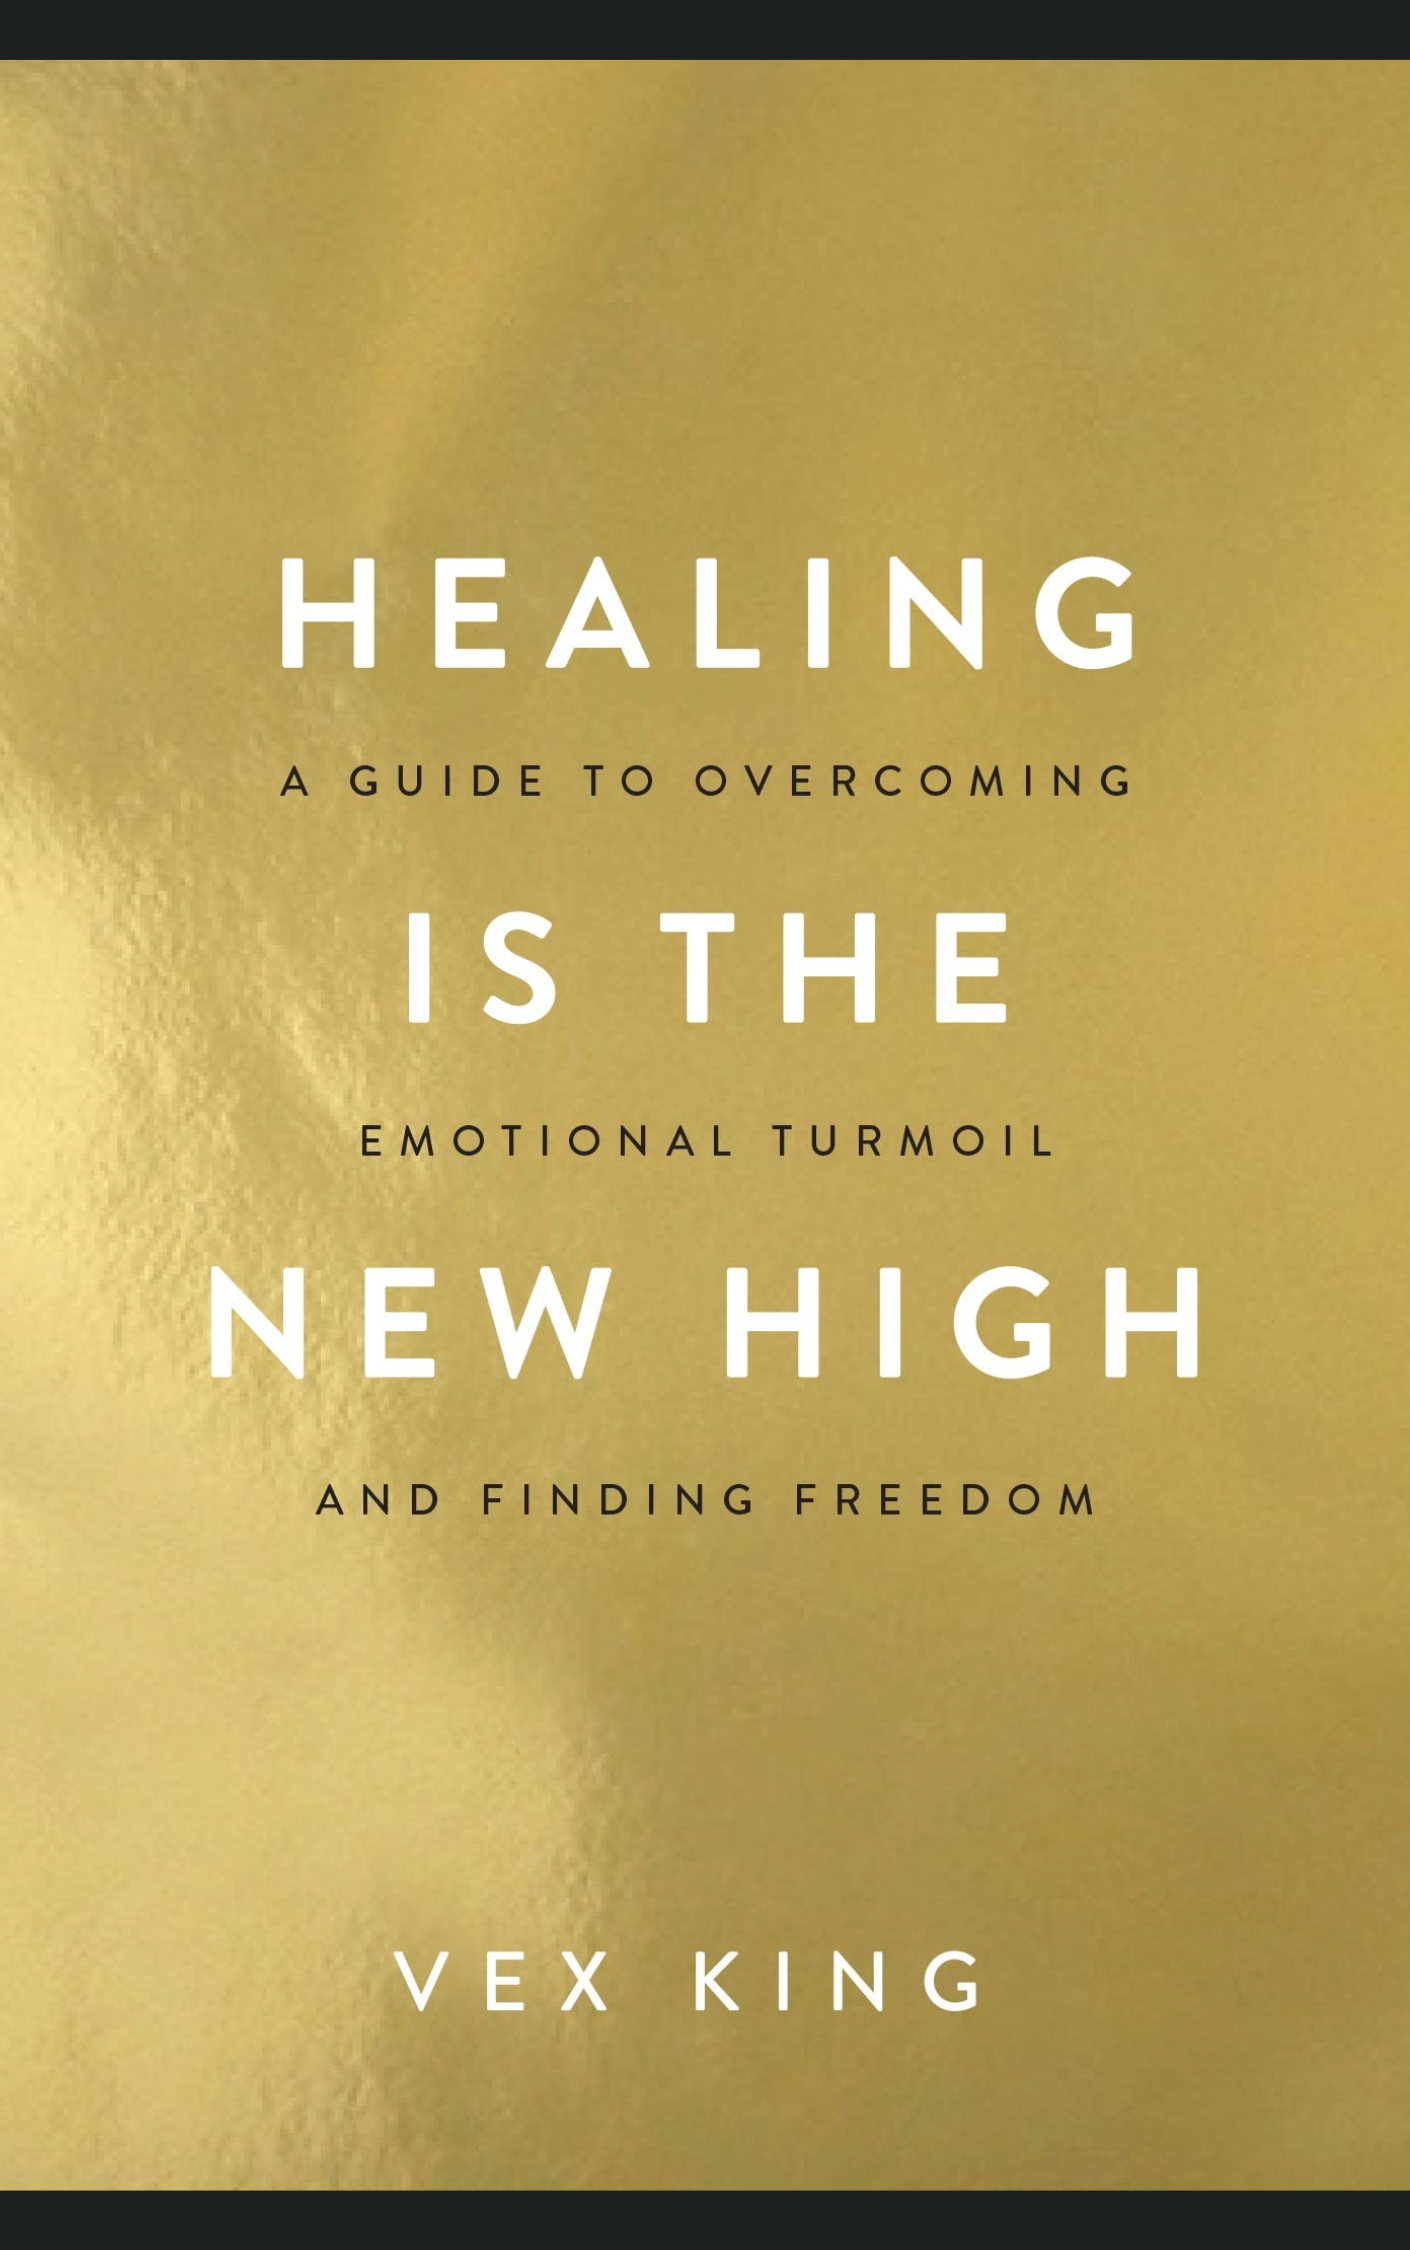 HEALING IS THE NEW HIGH by VEX KING